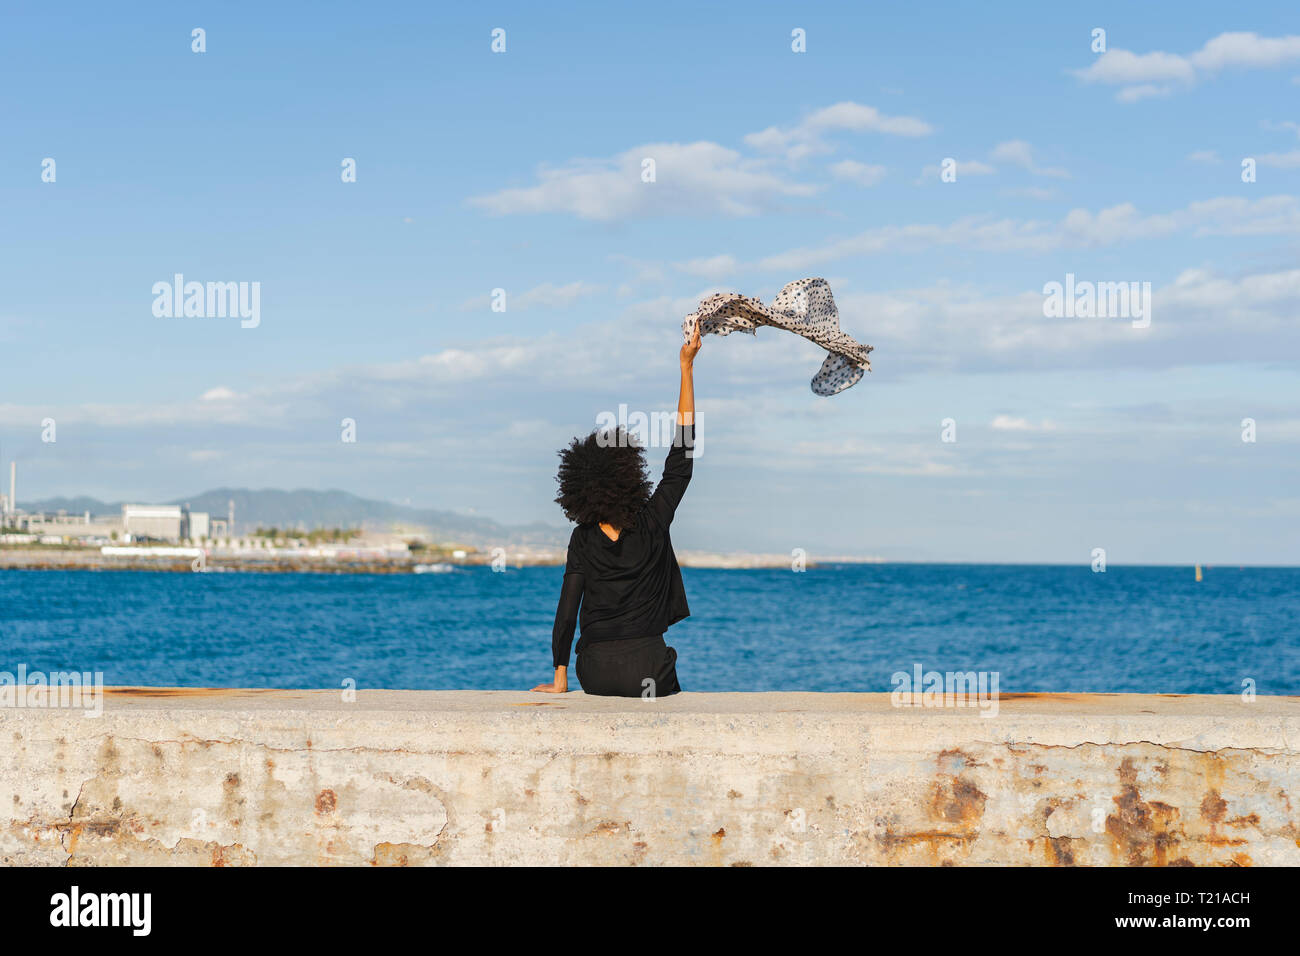 Spain, Barcelona, back view of woman dressed in black sitting on wall waving with scarf Stock Photo